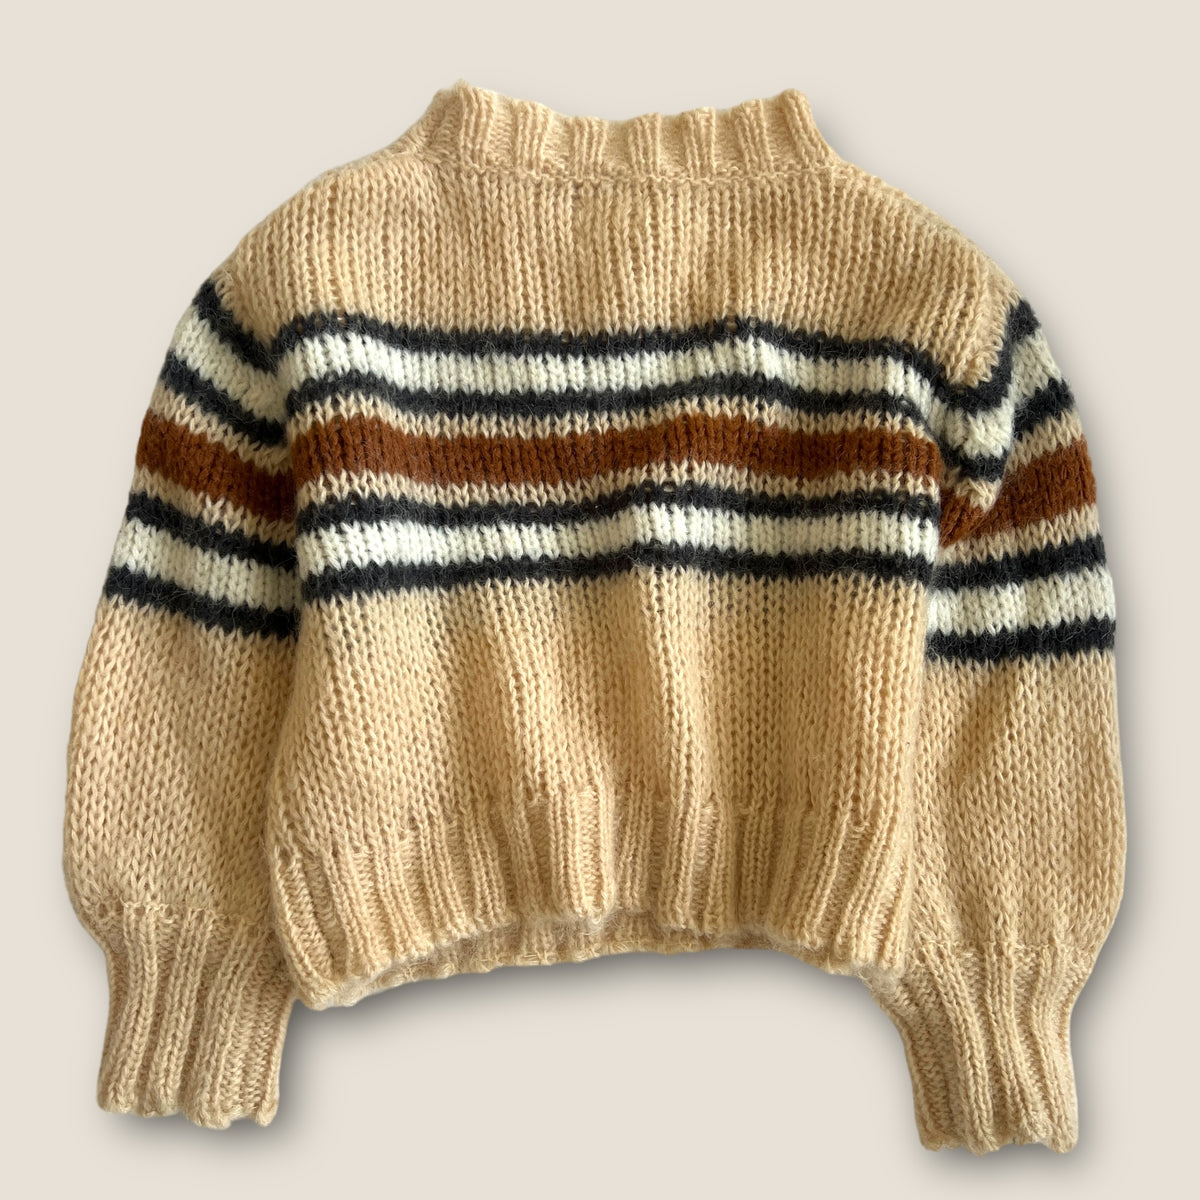 Long Live The Queen Wool Jumper size 5-6 years